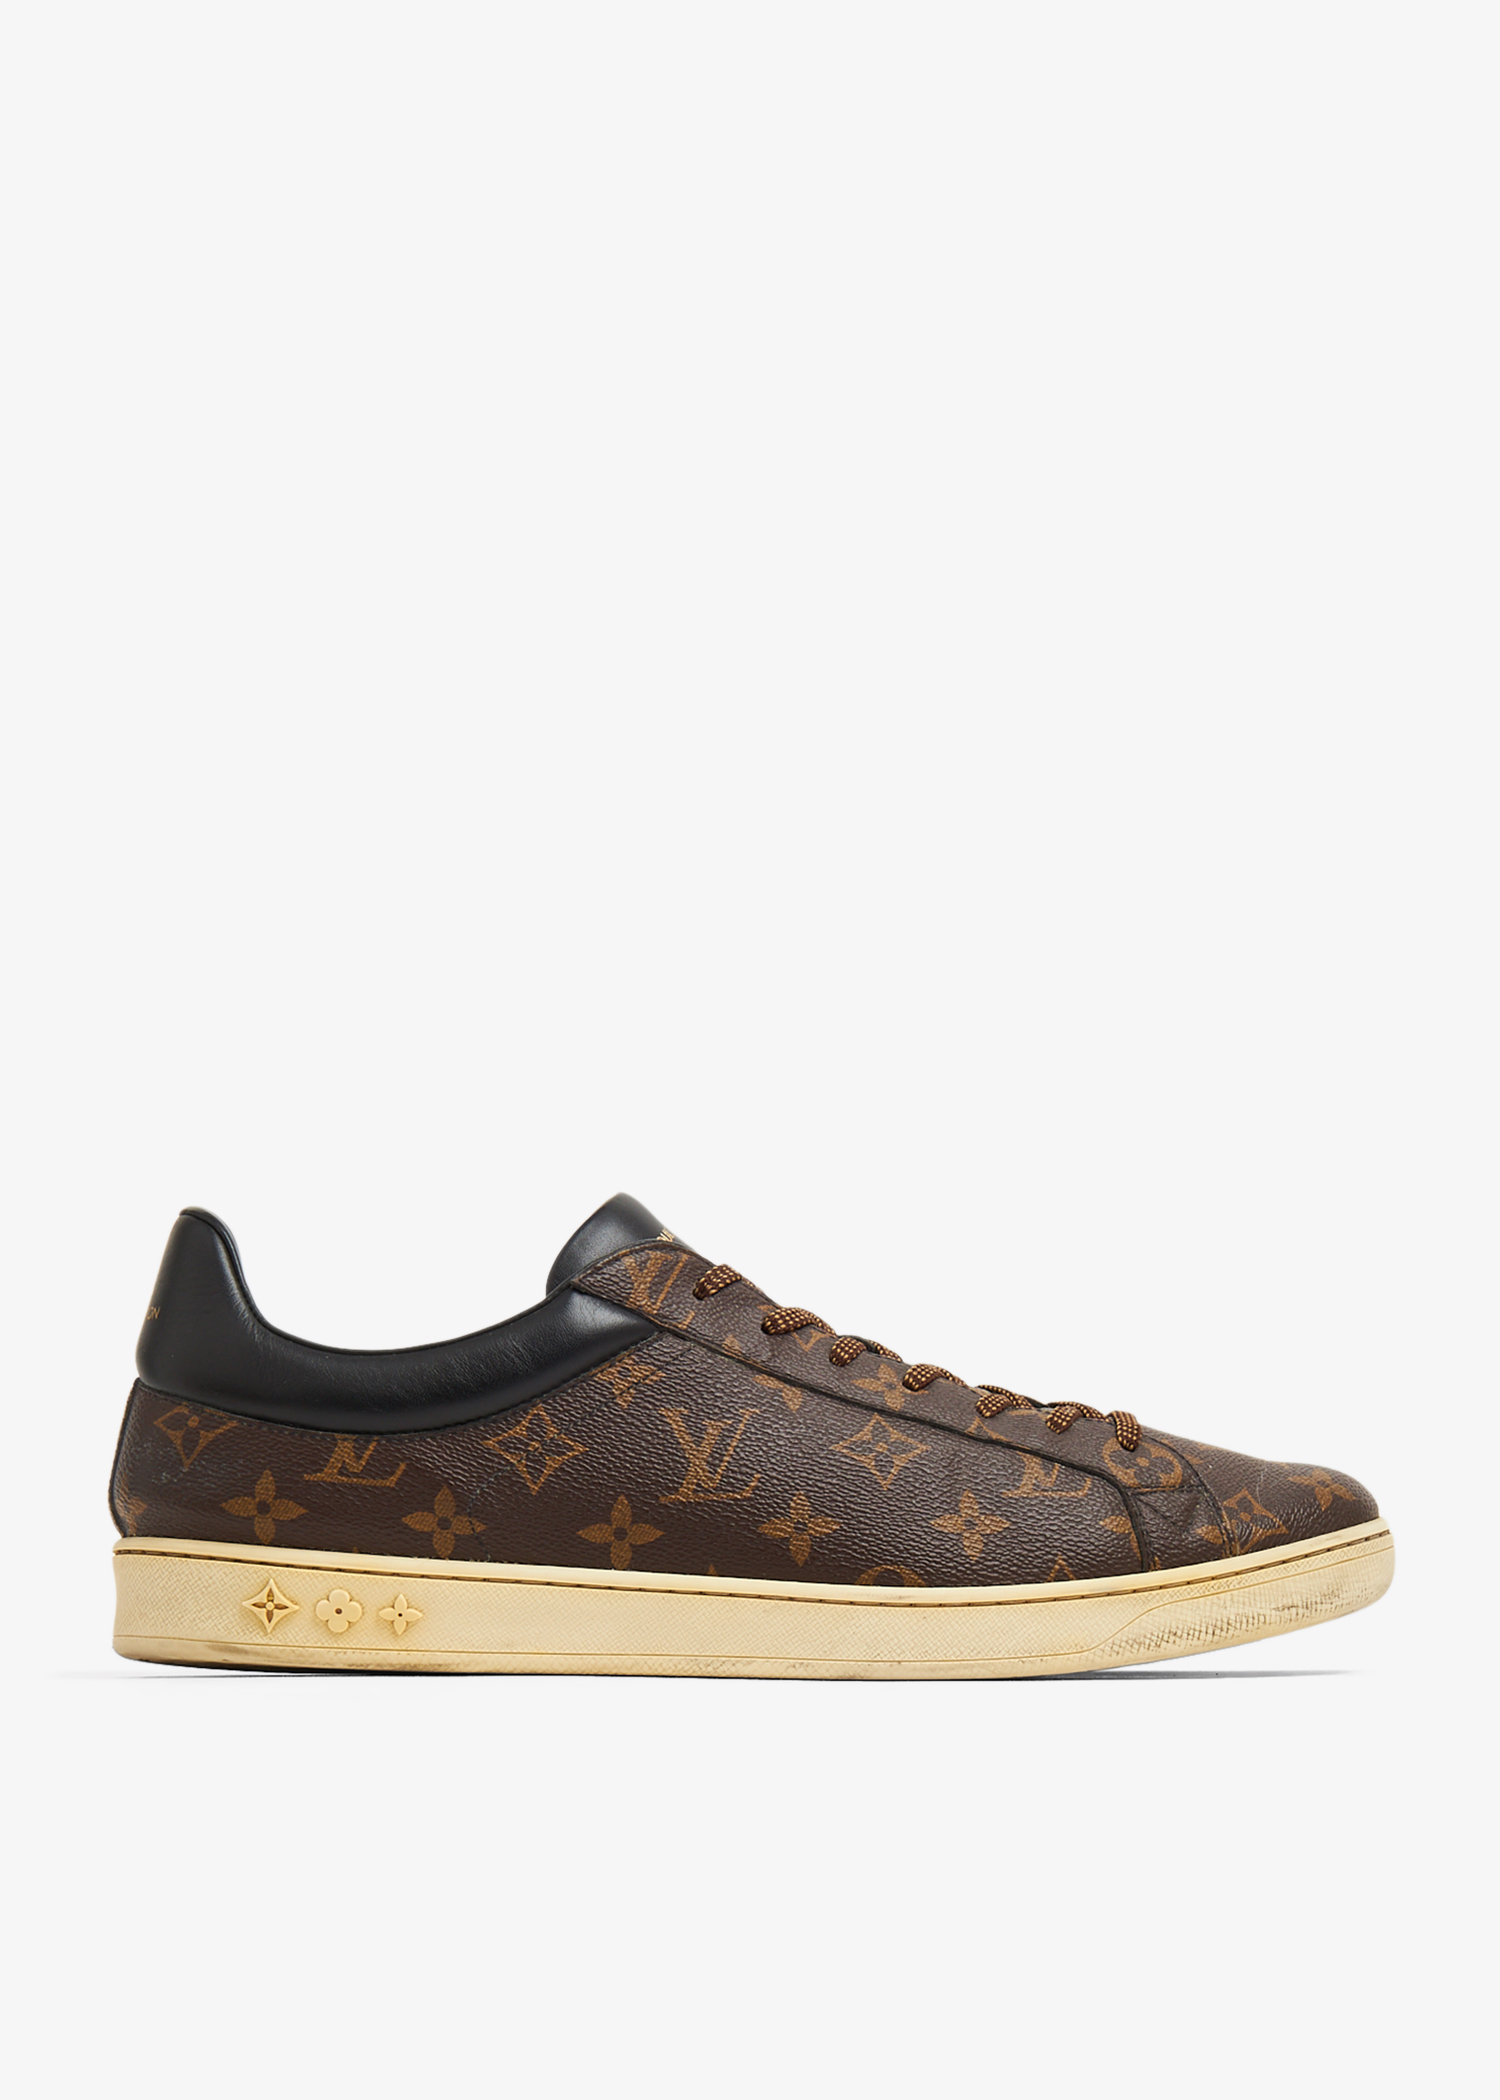 Louis Vuitton Pre-Loved Luxembourg sneakers for Men - Brown in Bahrain